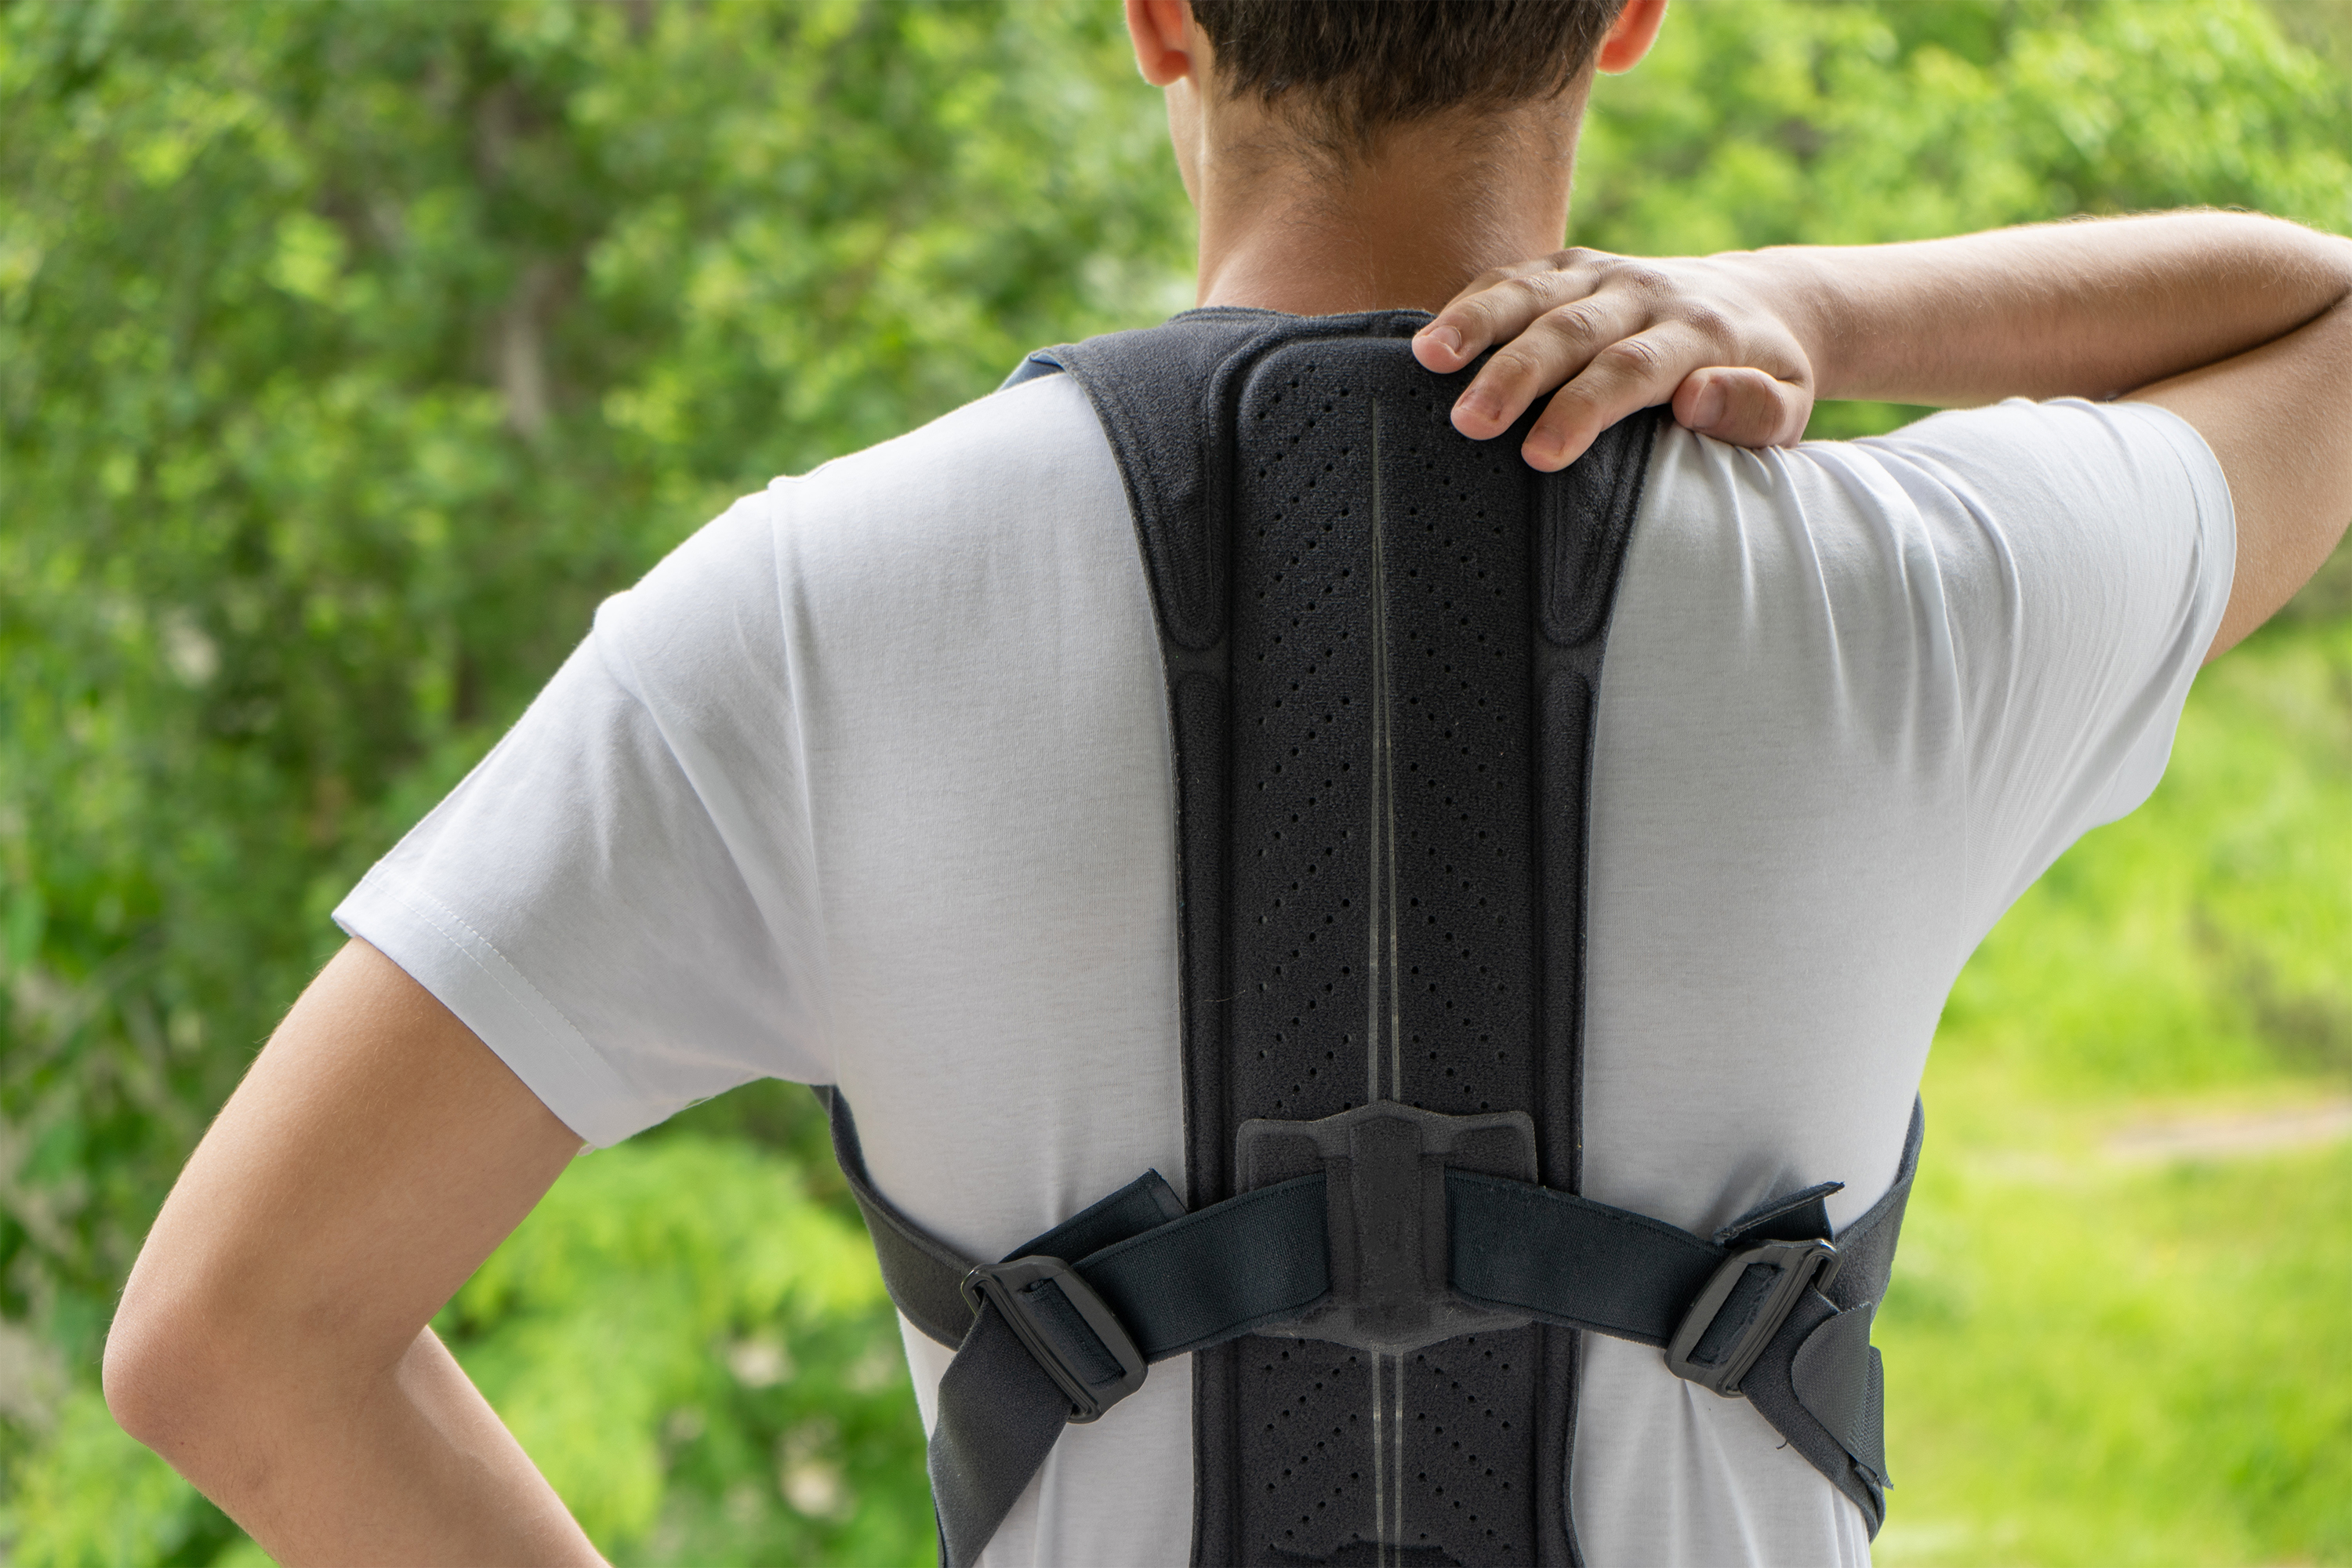 Steeper Group - Why a Correctly Fitting Spinal Brace is Essential